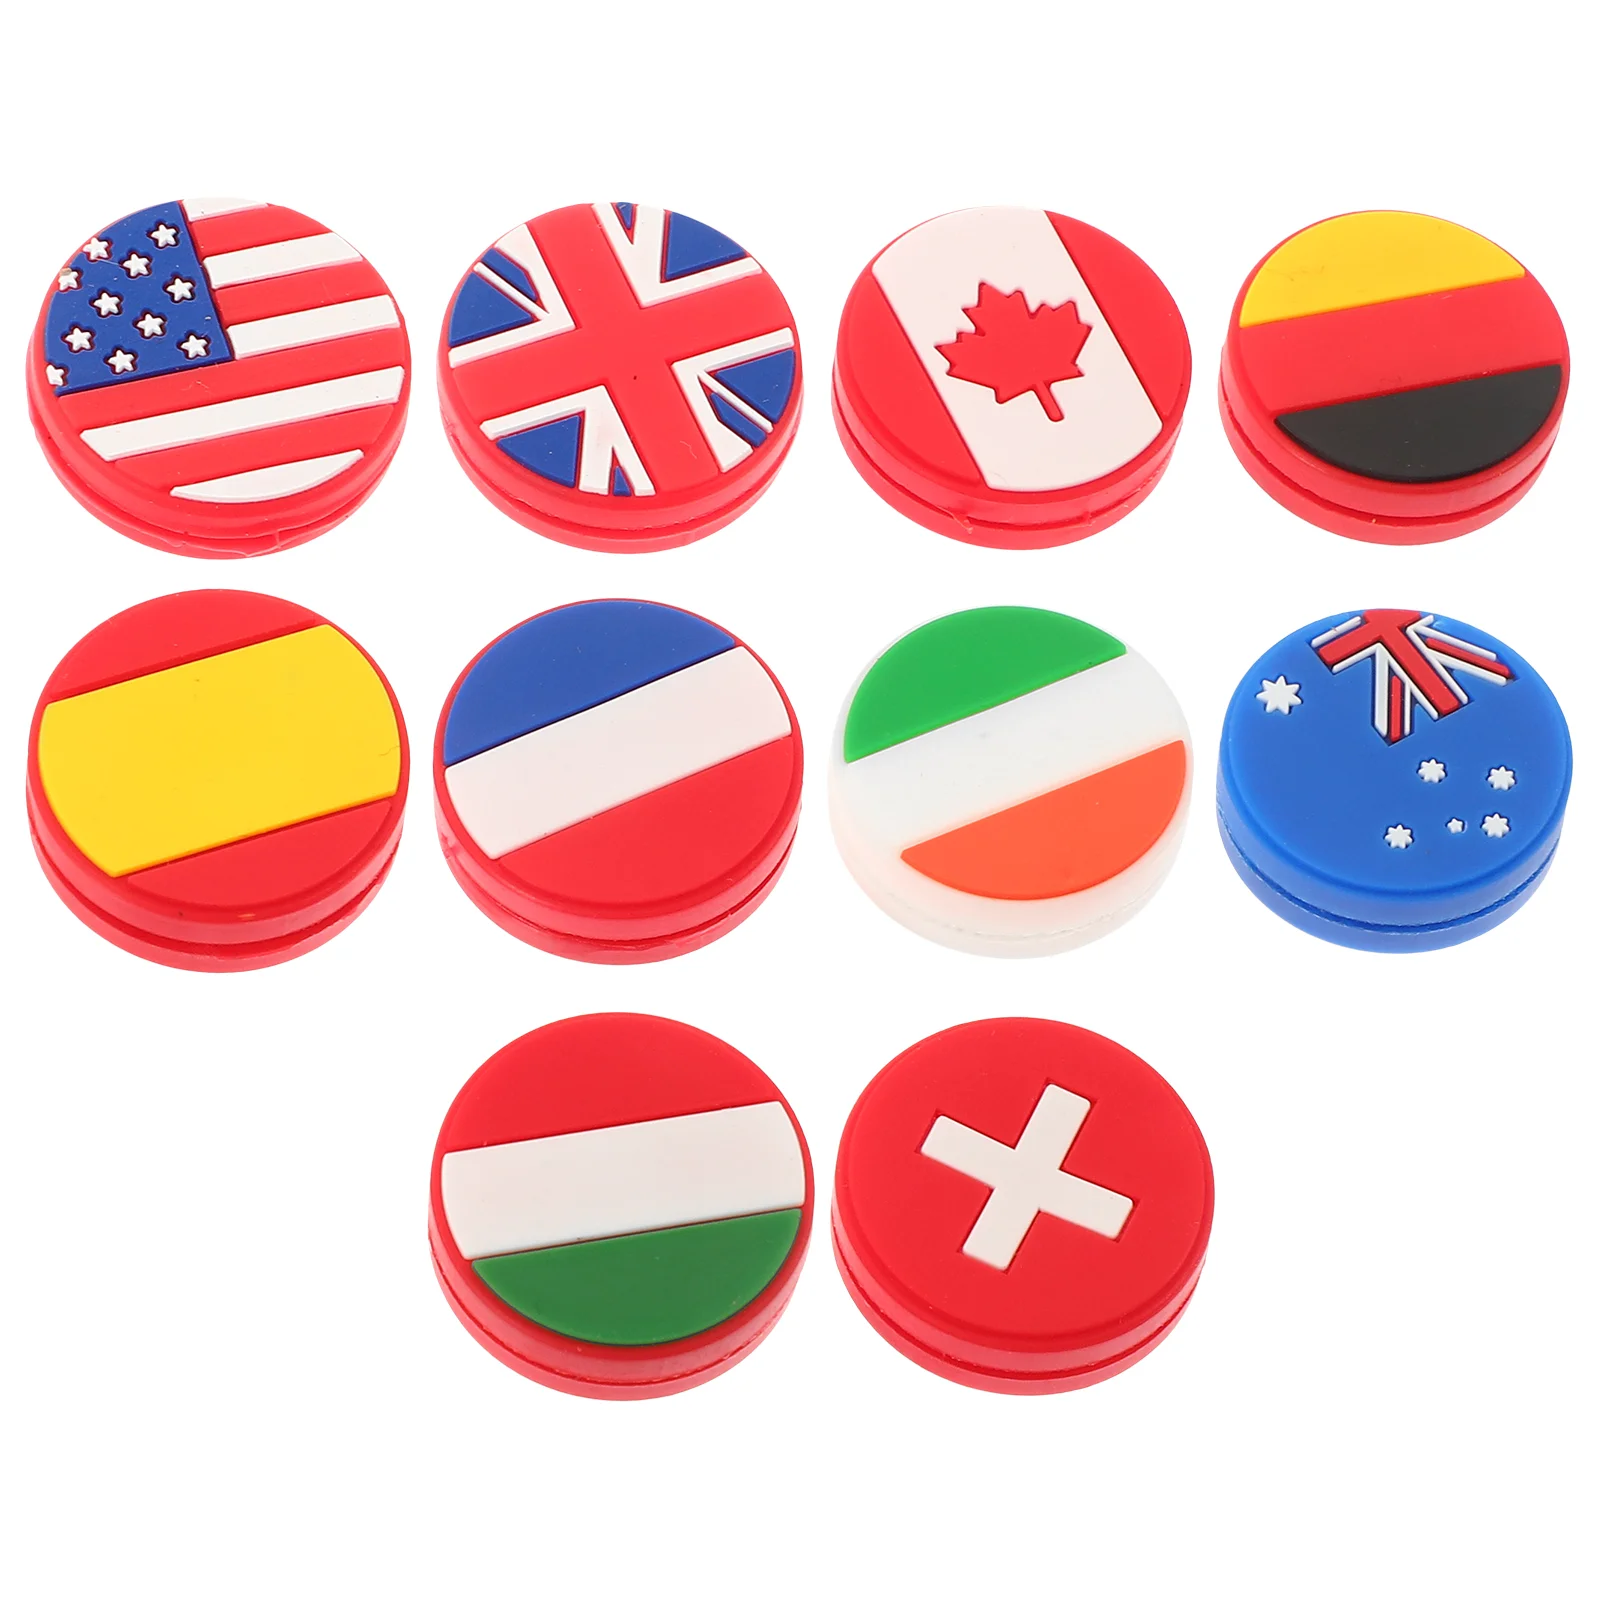 

10PCS Vibration Dampeners Silicone Tennis Dampener National Flag String Absorber Accessory for Tennis Beginners